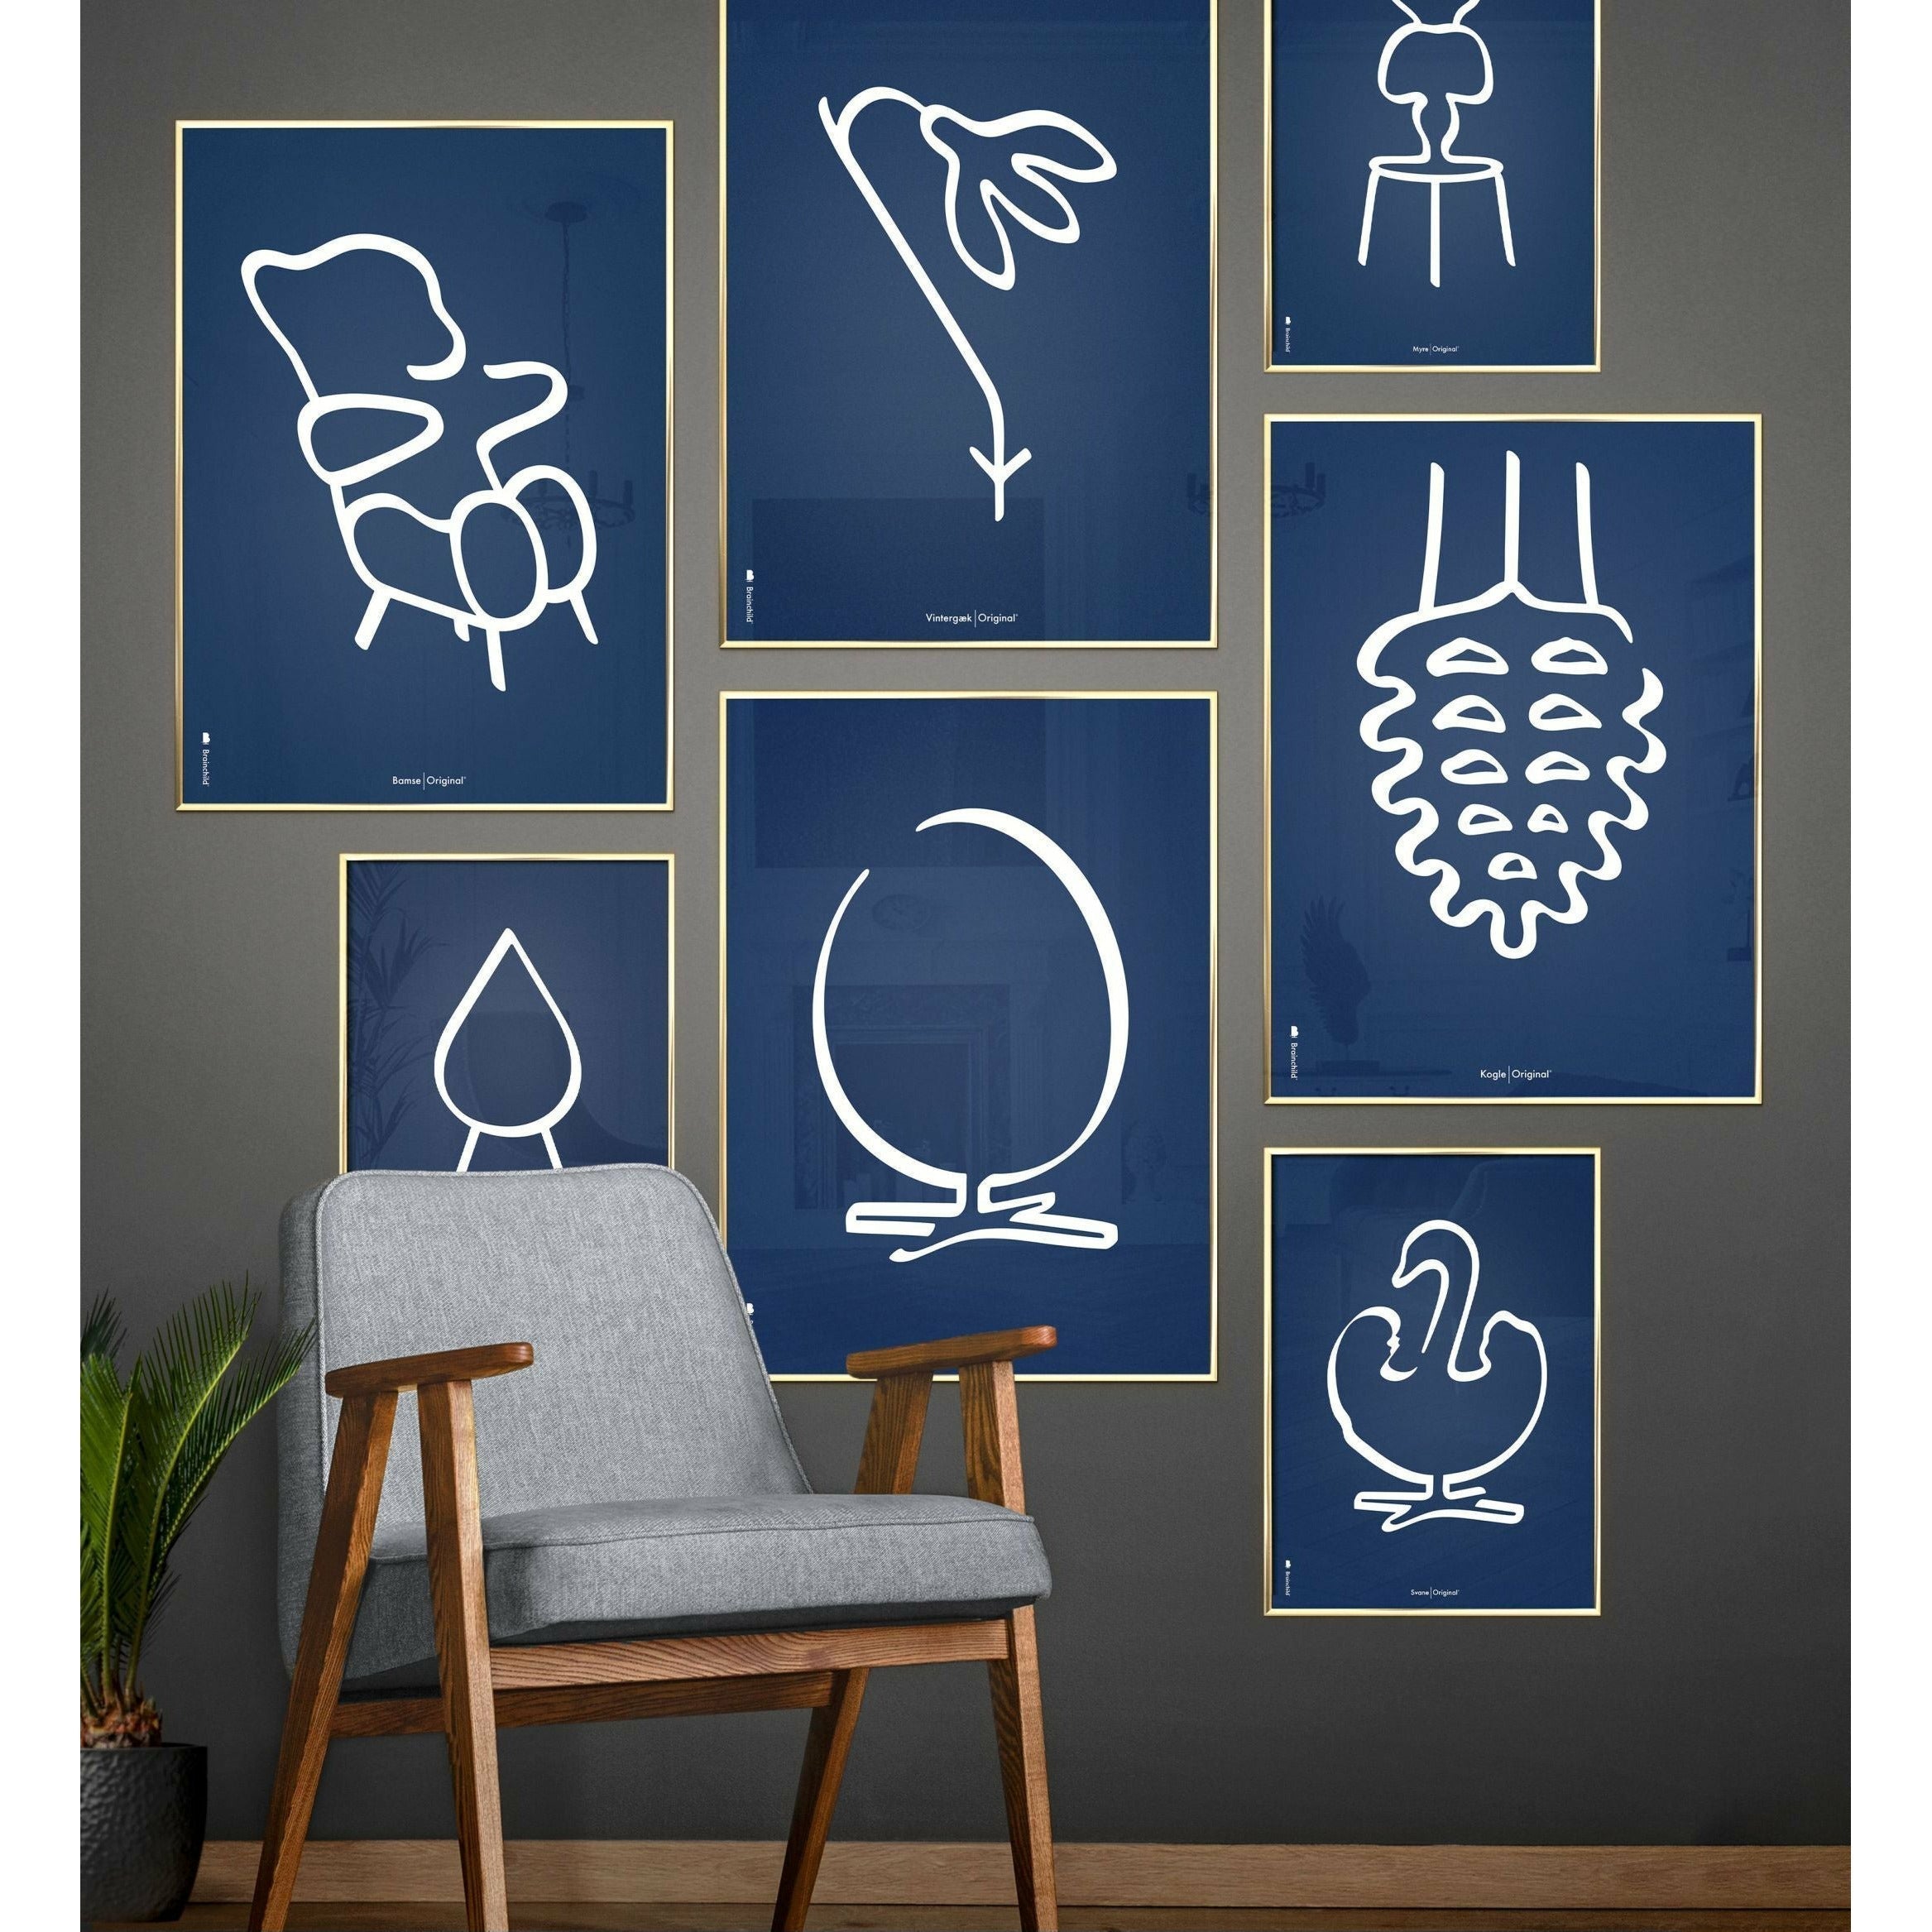 Brainchild Snowdrop Line Poster, Frame In Black Lacquered Wood 50x70 Cm, Blue Background